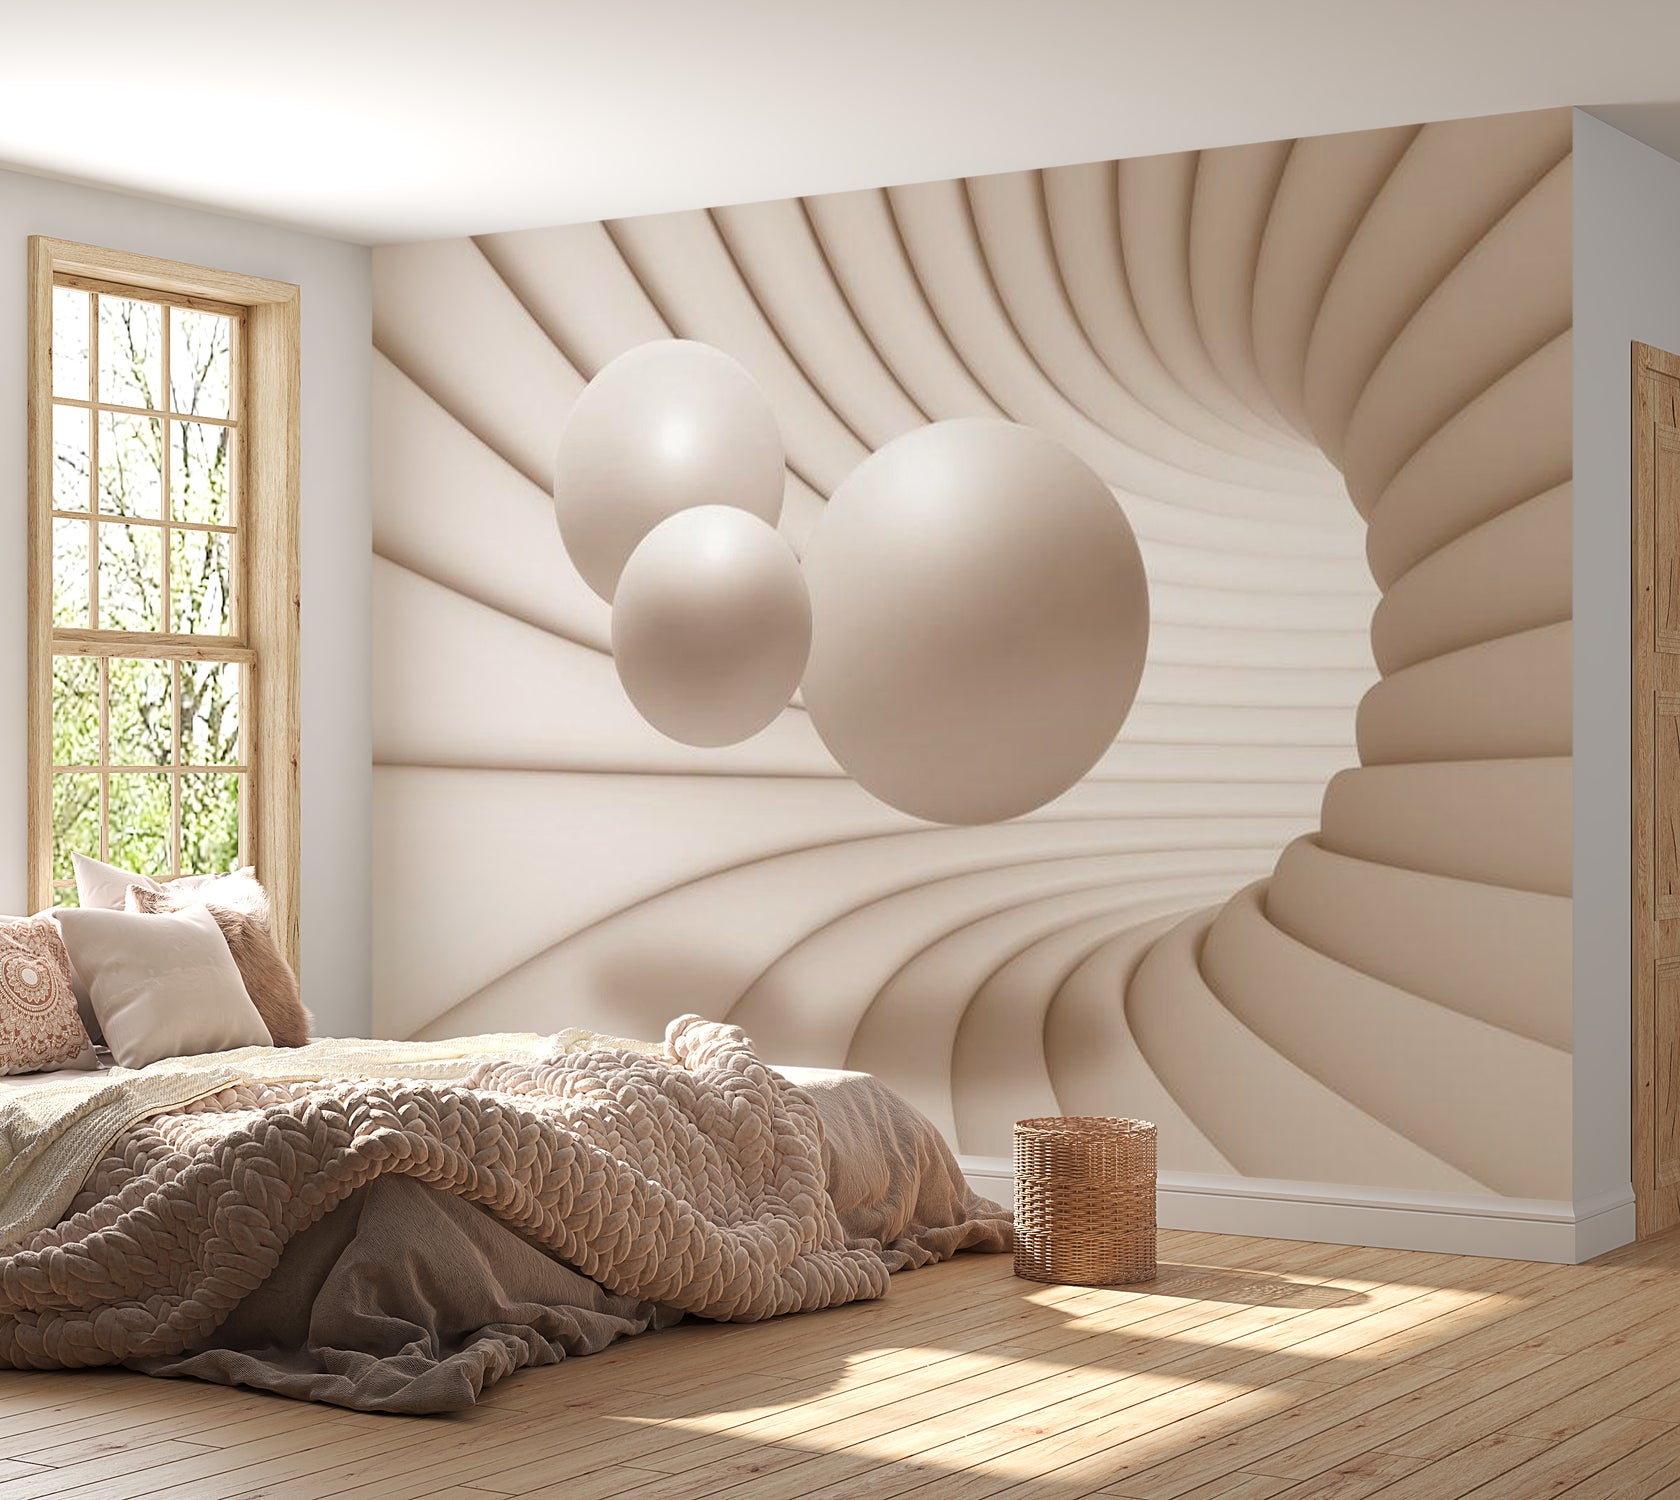 Peel & Stick 3D Illusion Wall Mural - Balls In The Tunnel - Removable Wall Decals